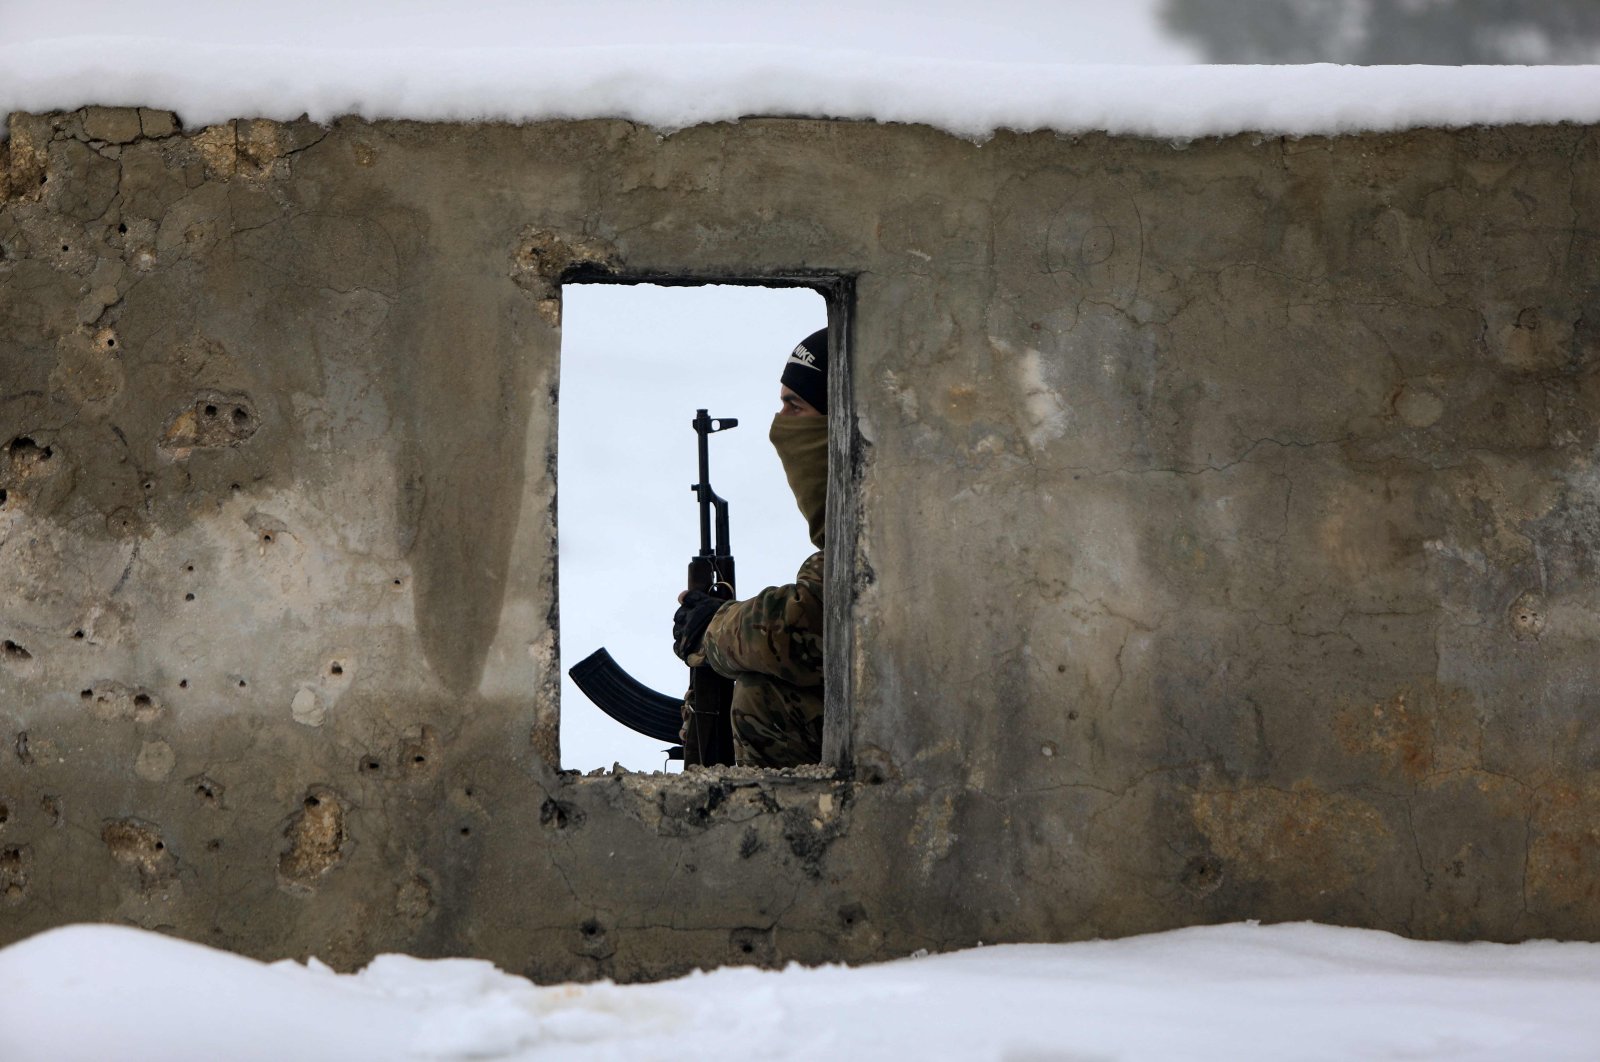 A Turkey-backed Syrian fighter is pictured during military training at a snow-covered base in the Afrin region in the northwestern Aleppo province, Syria, Jan. 26, 2022. (AFP Photo)